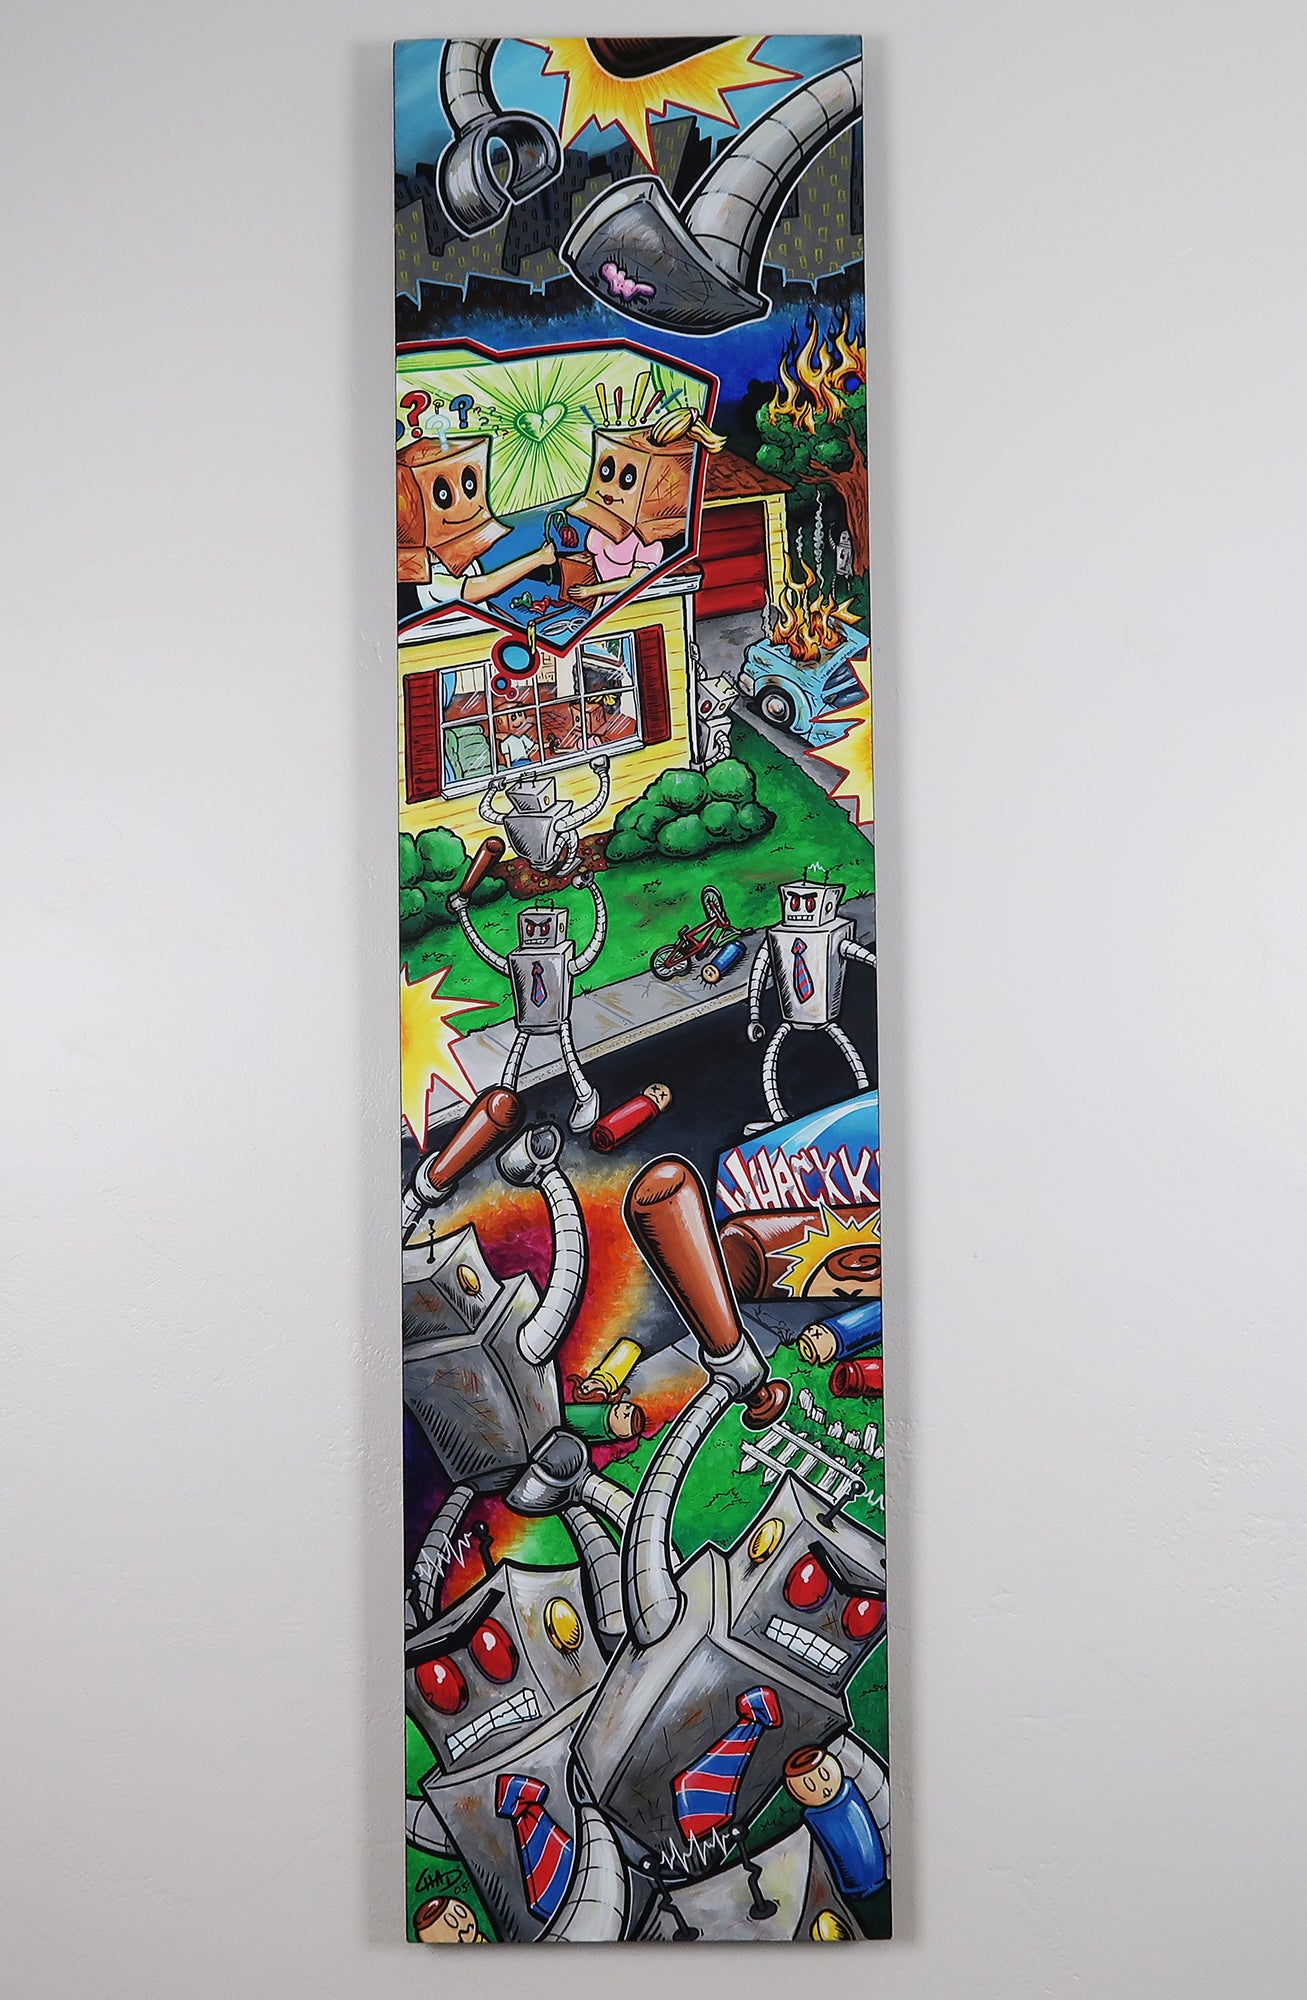 Seek and Destroy - 15"x60" Canvas Painting